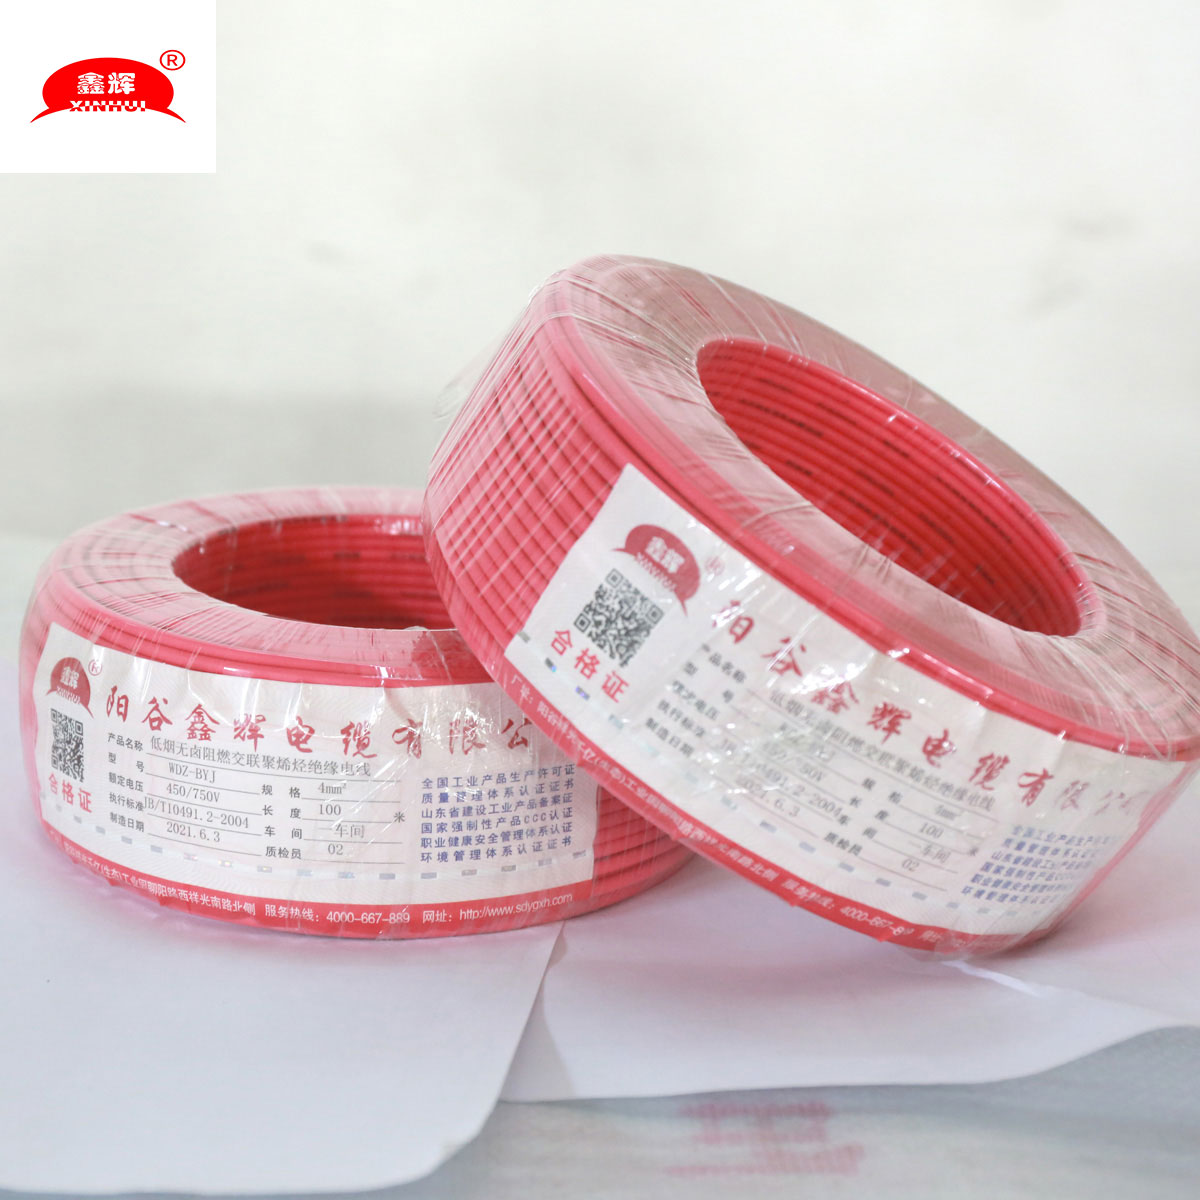 Hot 1.5mm 2.5mm 4mm 6mm 10mm Single Core Copper Pvc House Wiring Electrical Cable And wire price Building wire